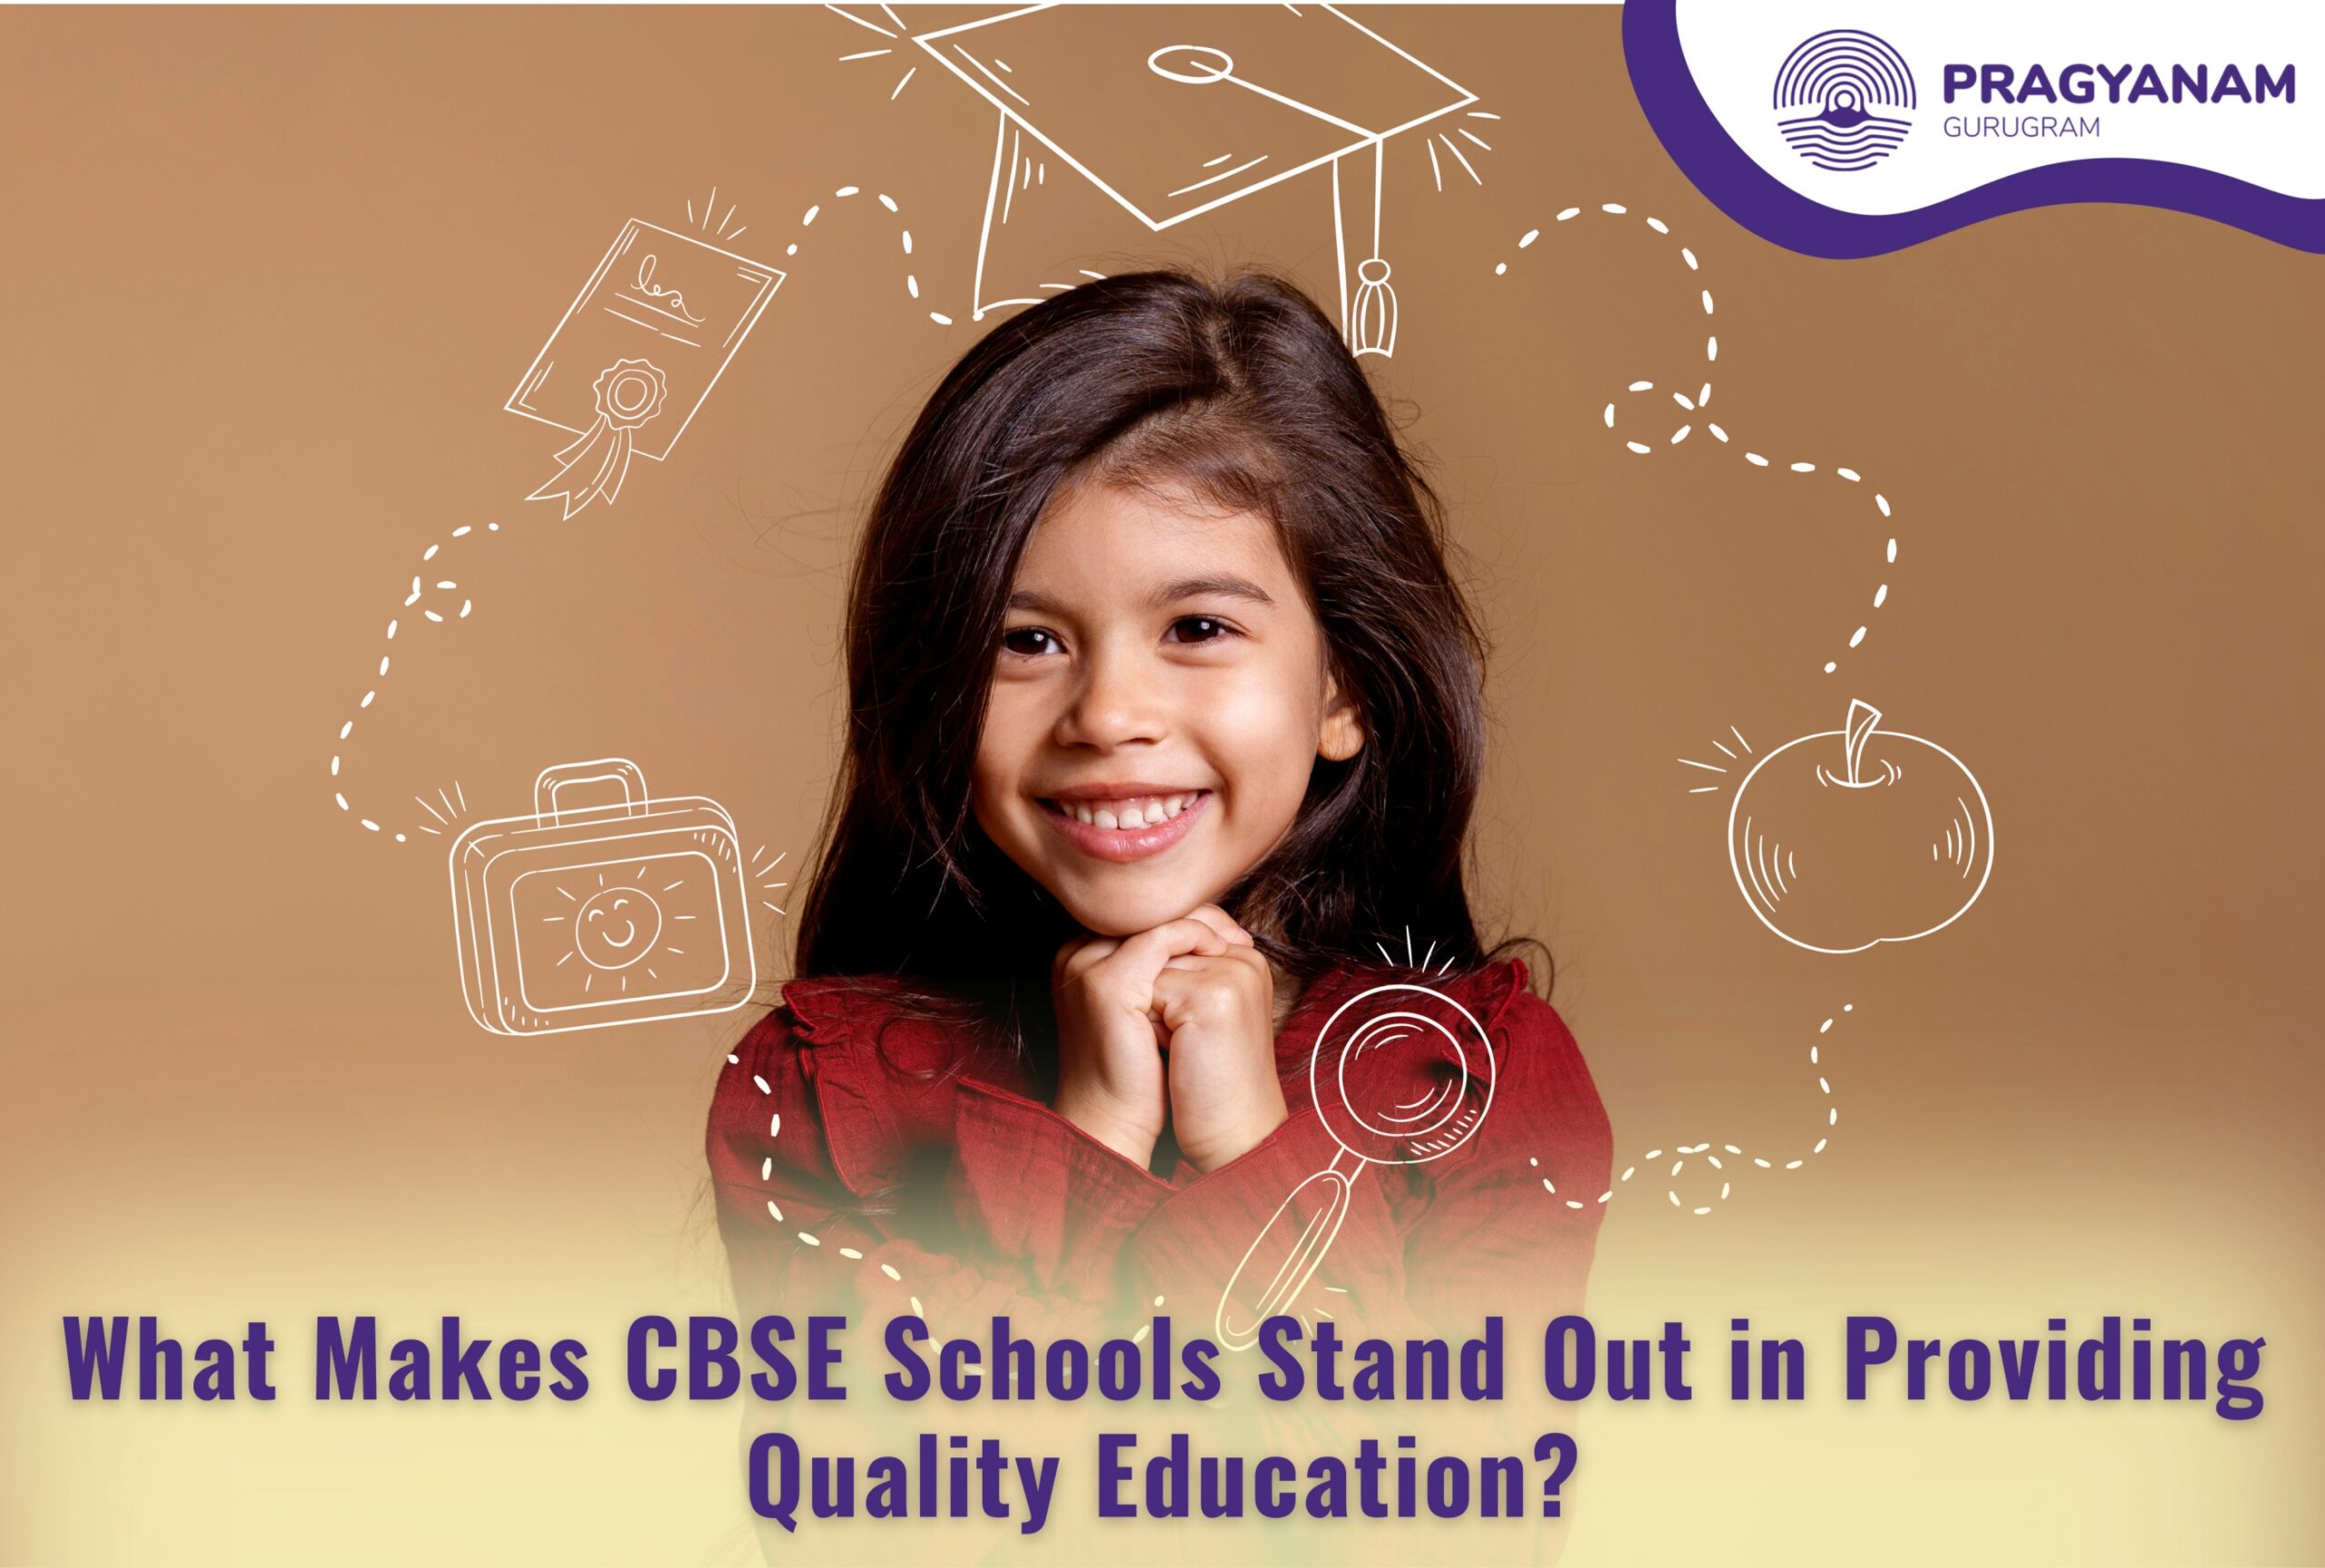 What Makes CBSE Schools Stand Out in Providing Quality Education